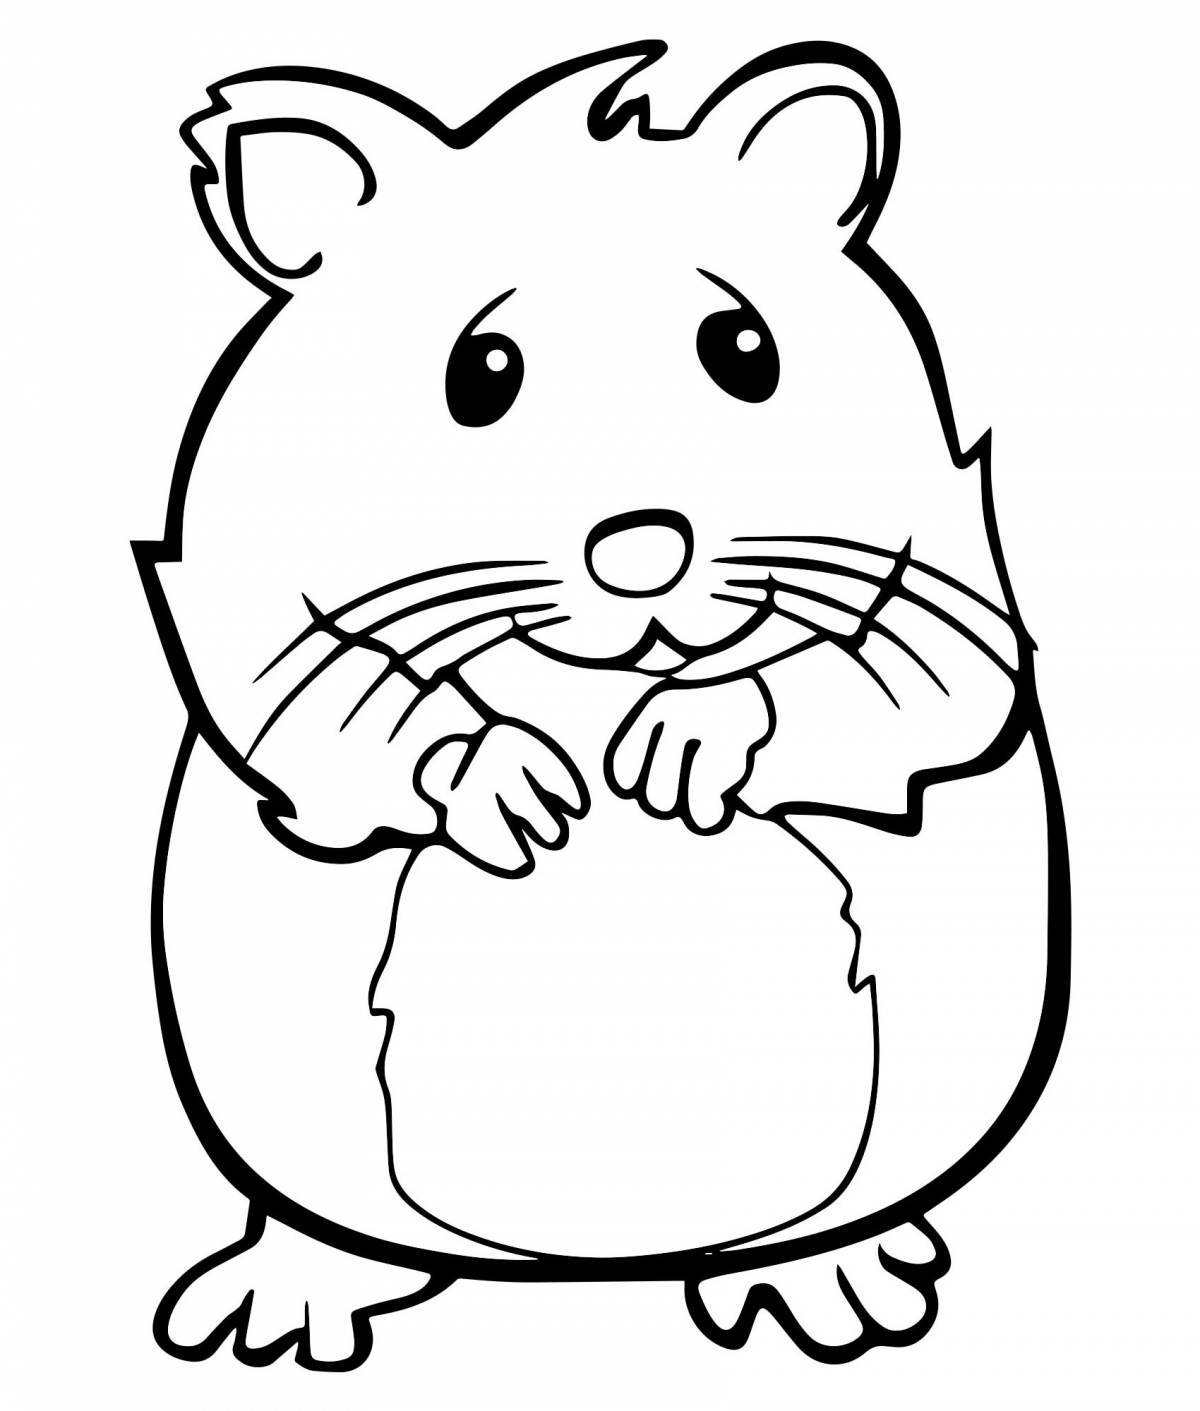 Coloring book funny hamster for kids